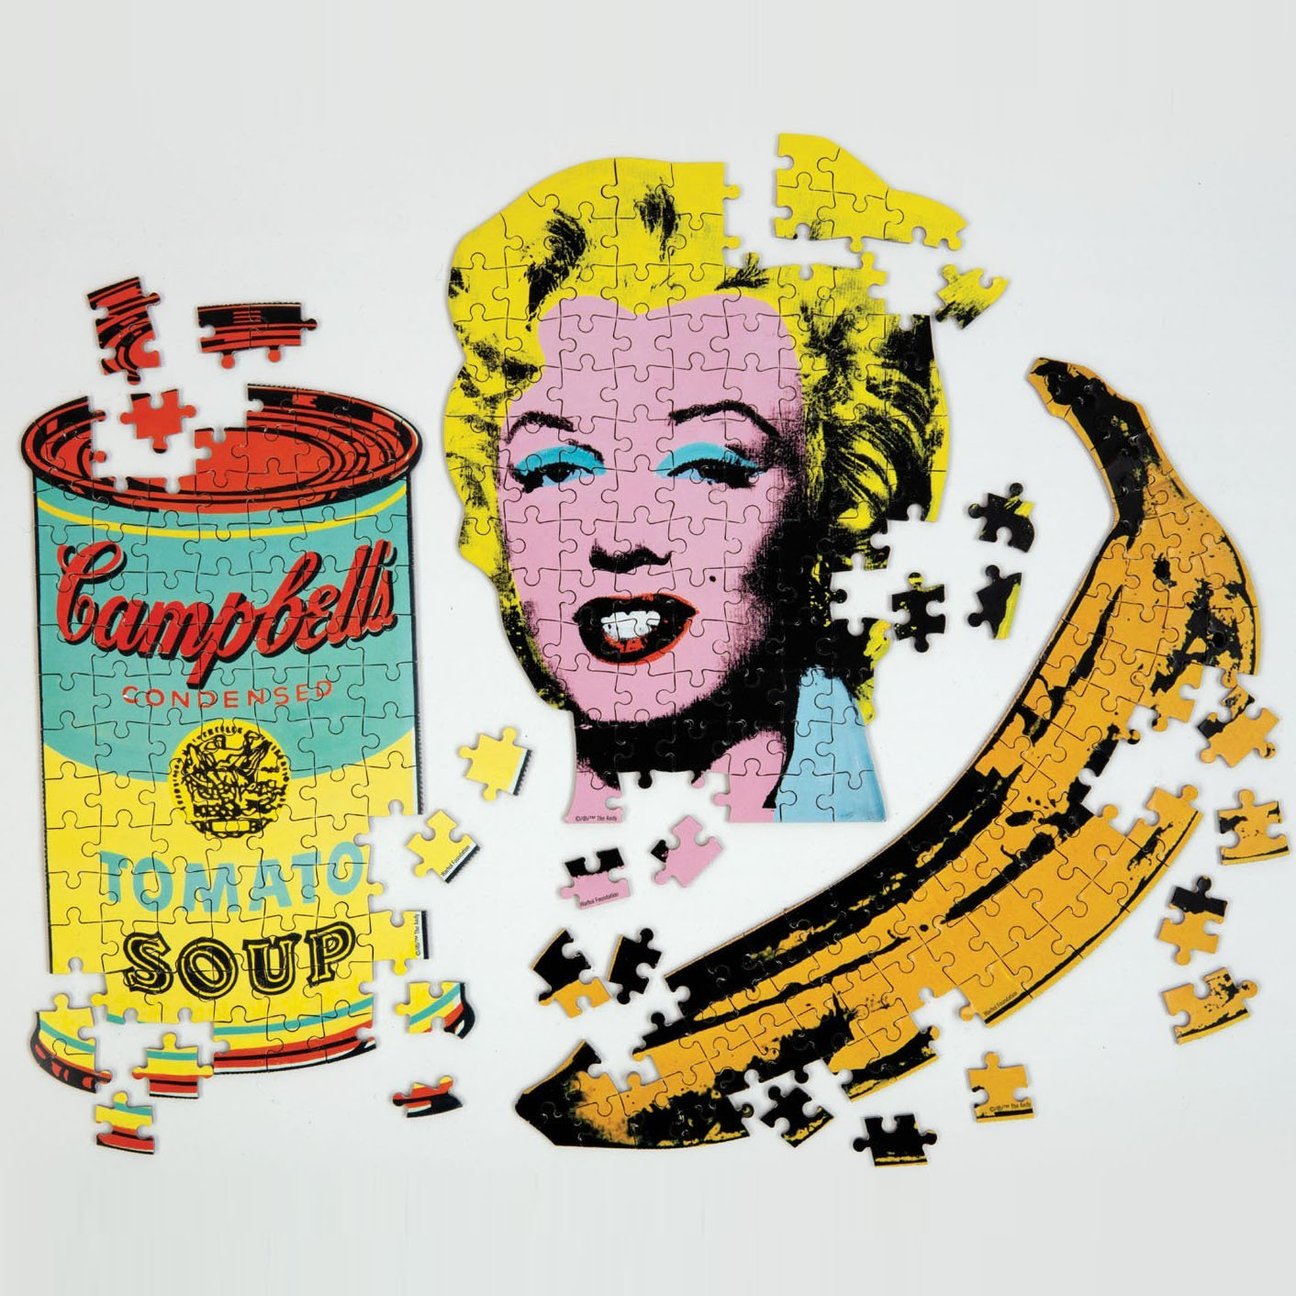 Andy Warhol: Soup Can Mini Shaped Puzzle